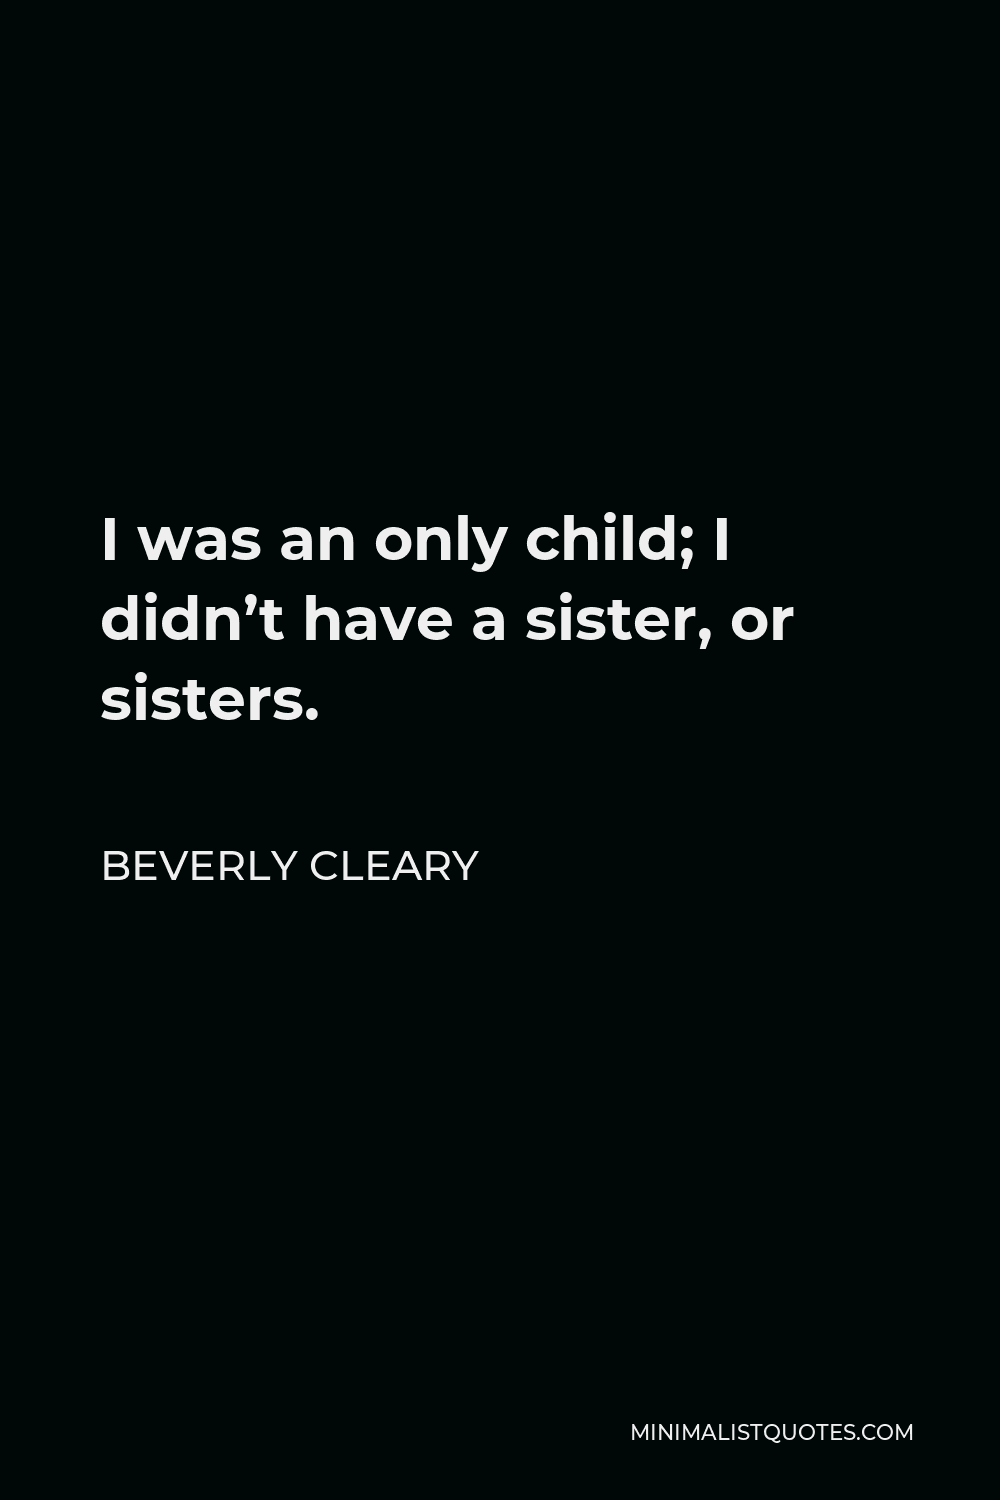 Beverly Cleary Quote - I was an only child; I didn’t have a sister, or sisters.